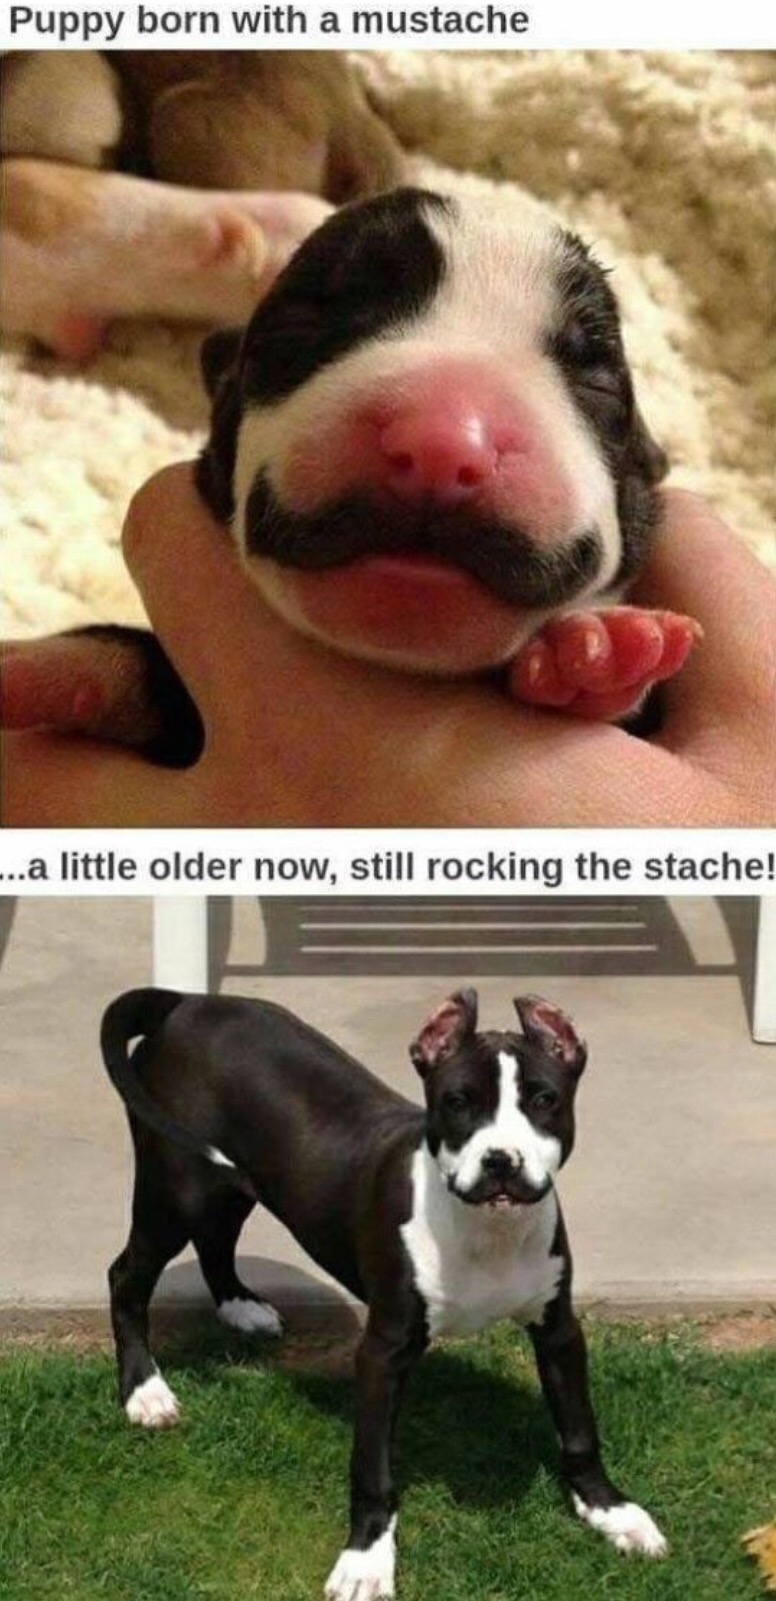 Puppy with Mustache is now dog with a mustache